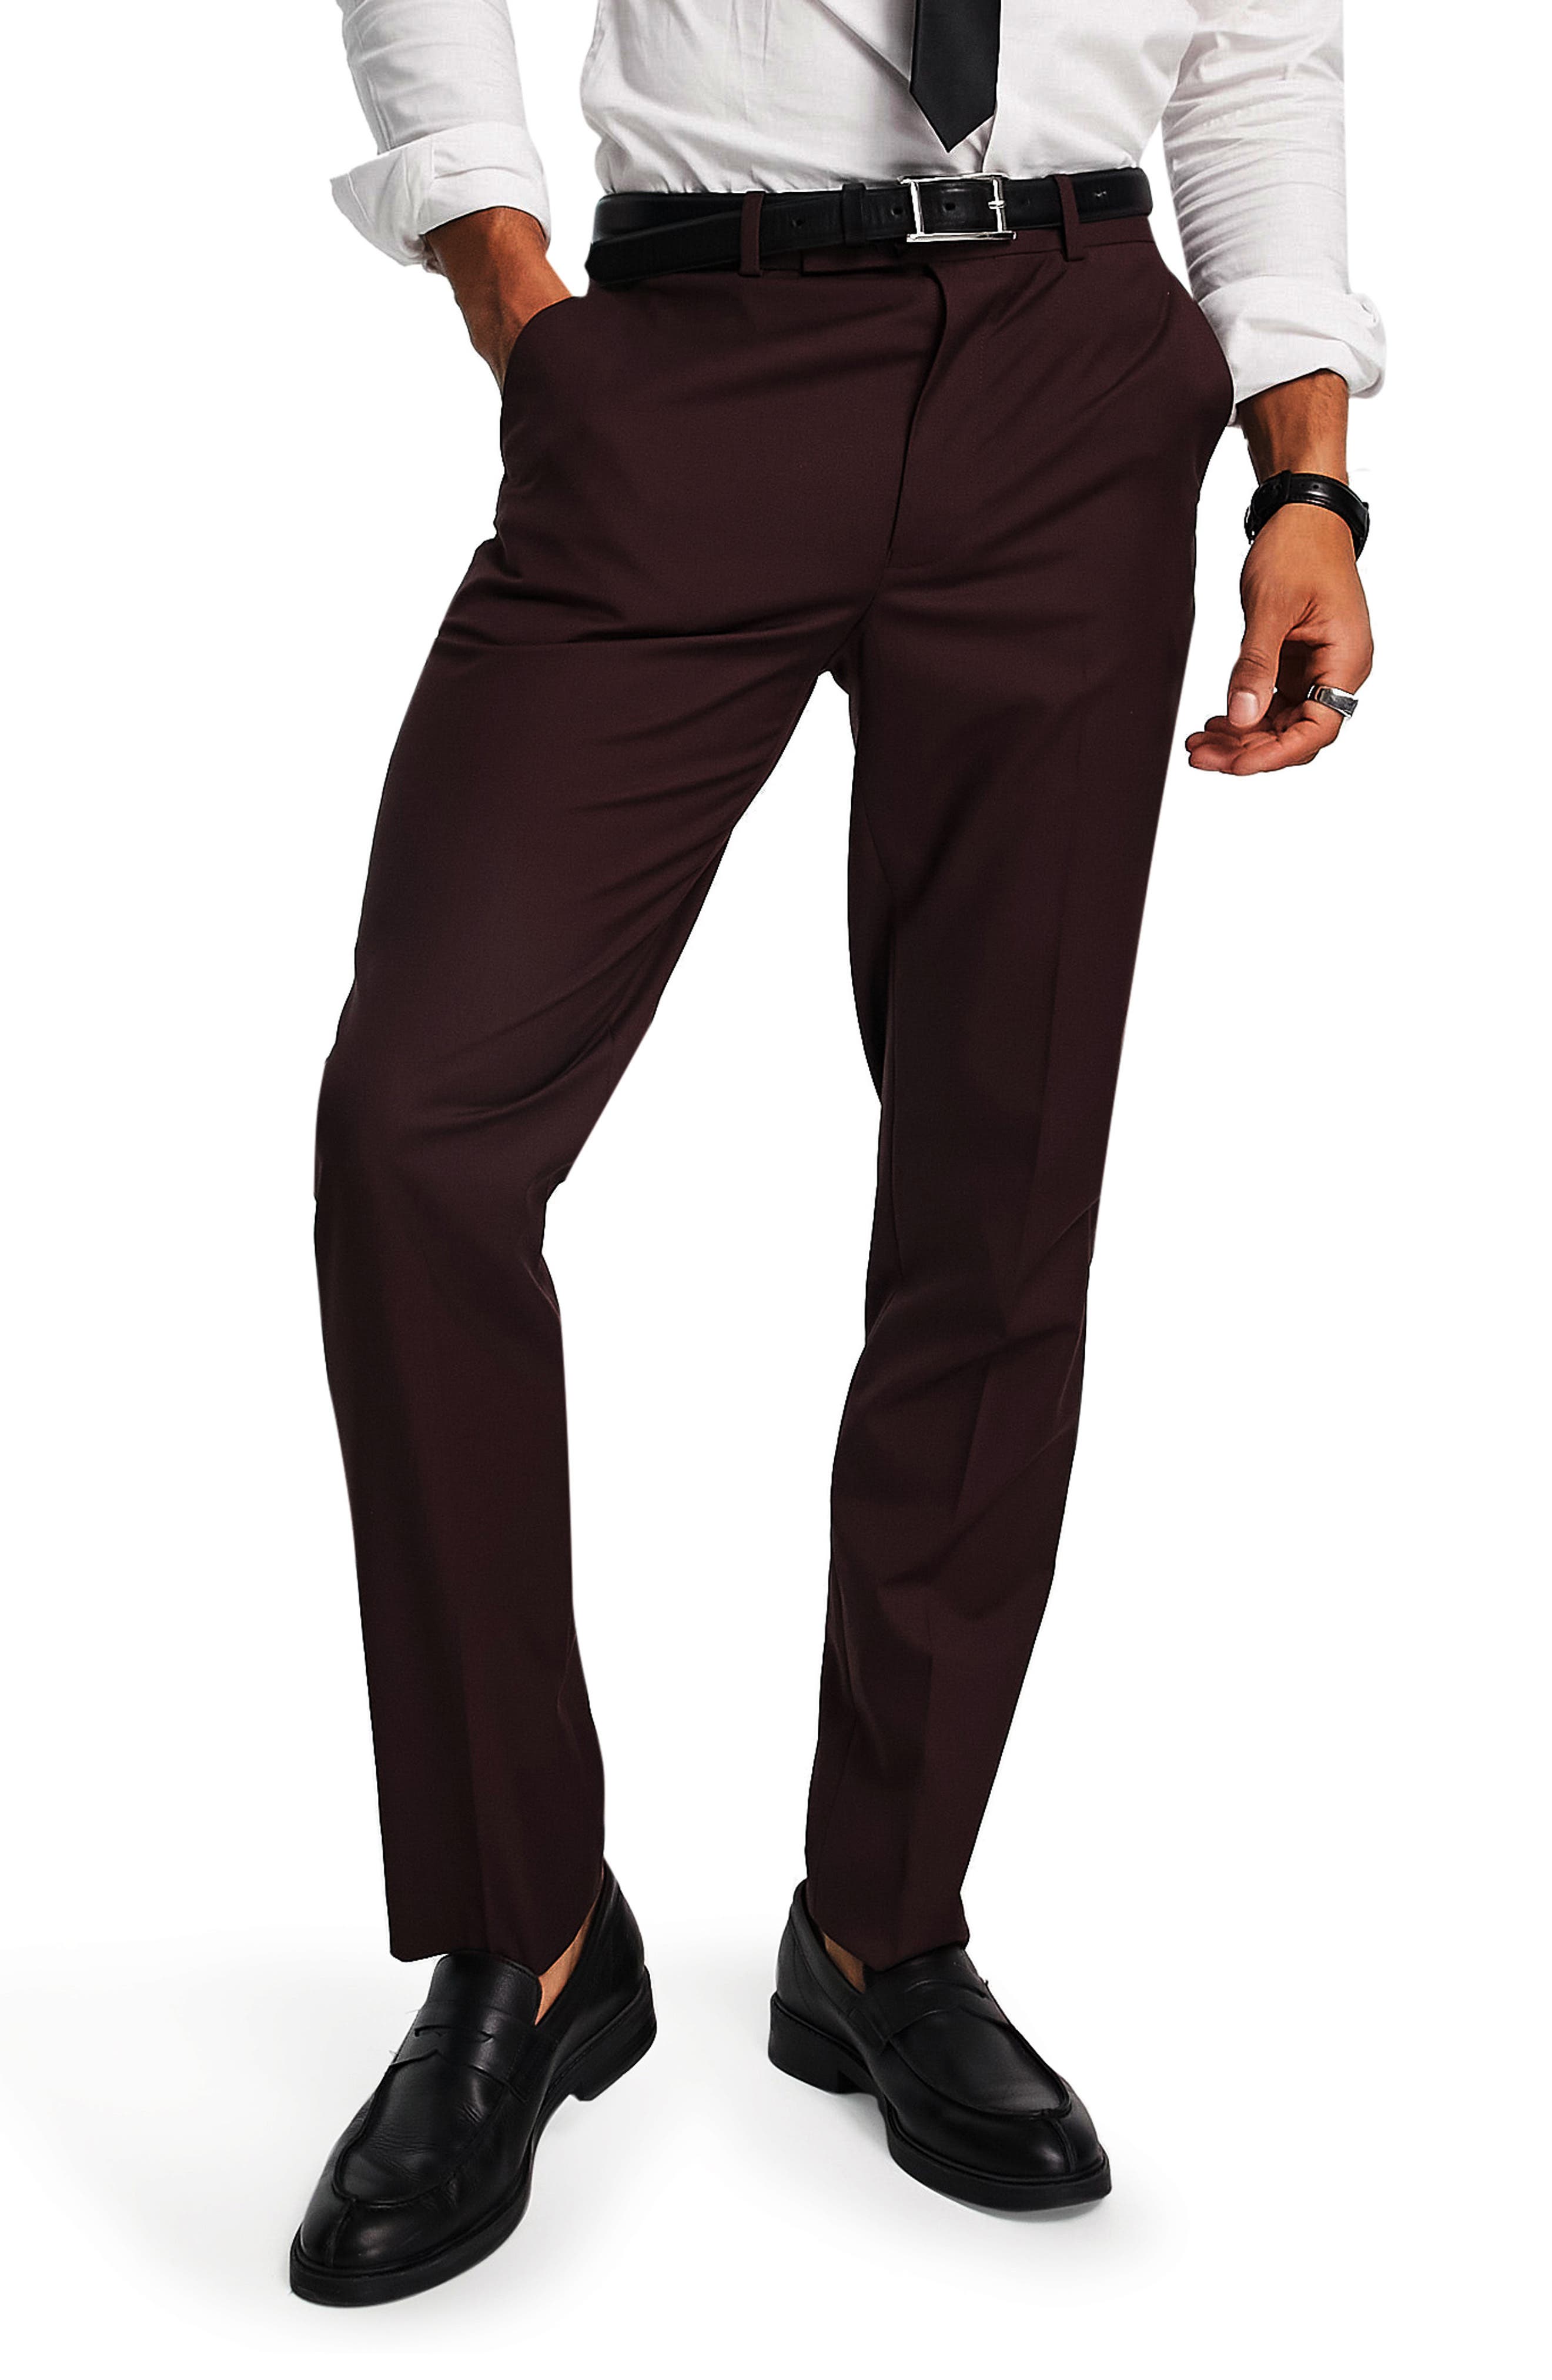 Red LAutre Chose Wool Pants in Maroon Womens Clothing Trousers Slacks and Chinos Full-length trousers 